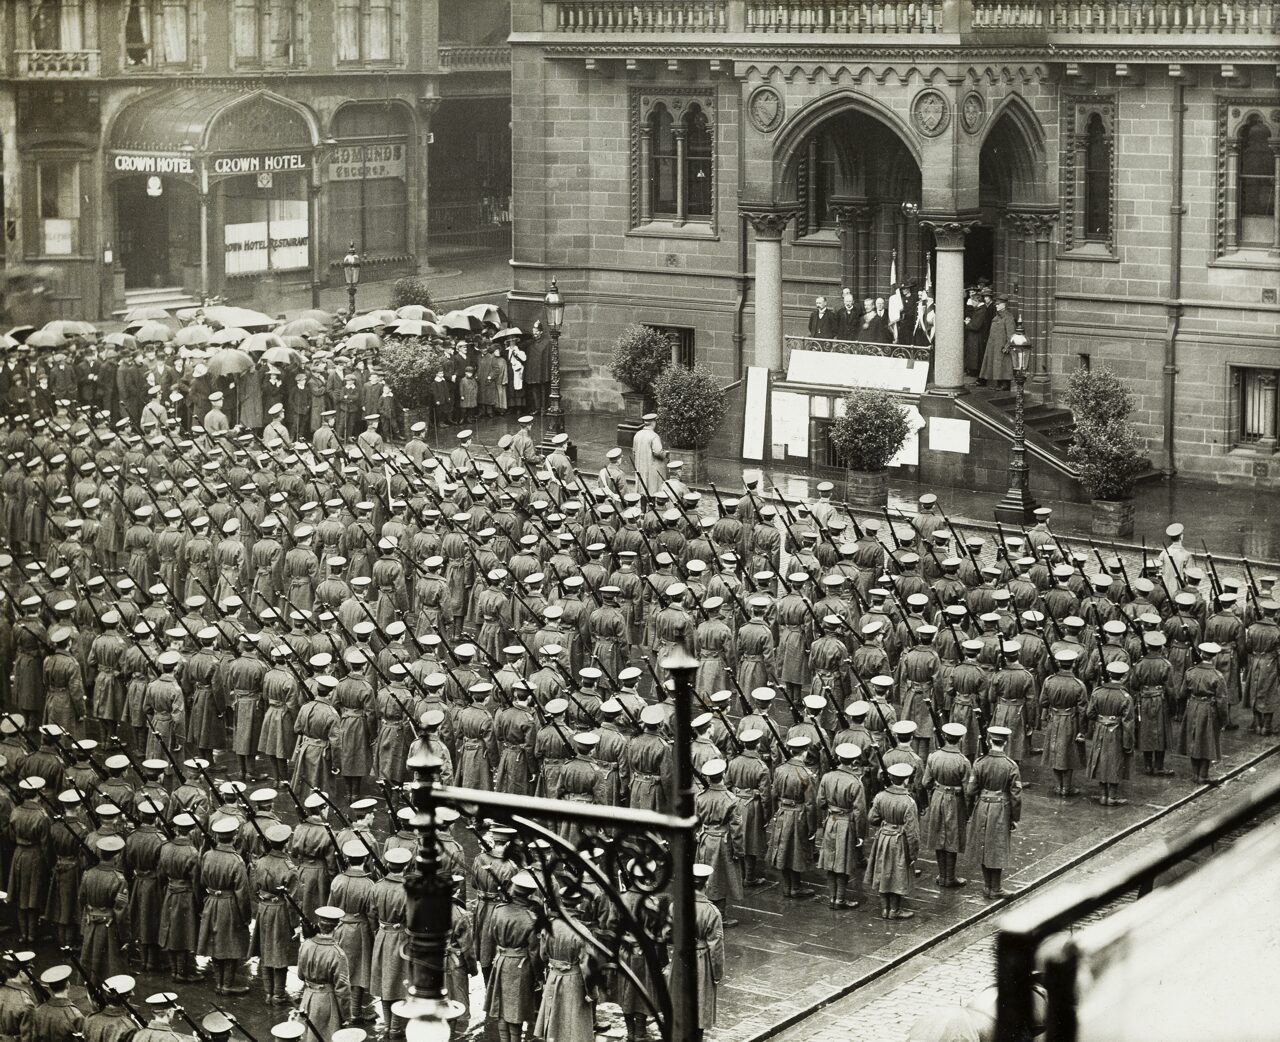 A black and white photo of soldiers standing in rows.